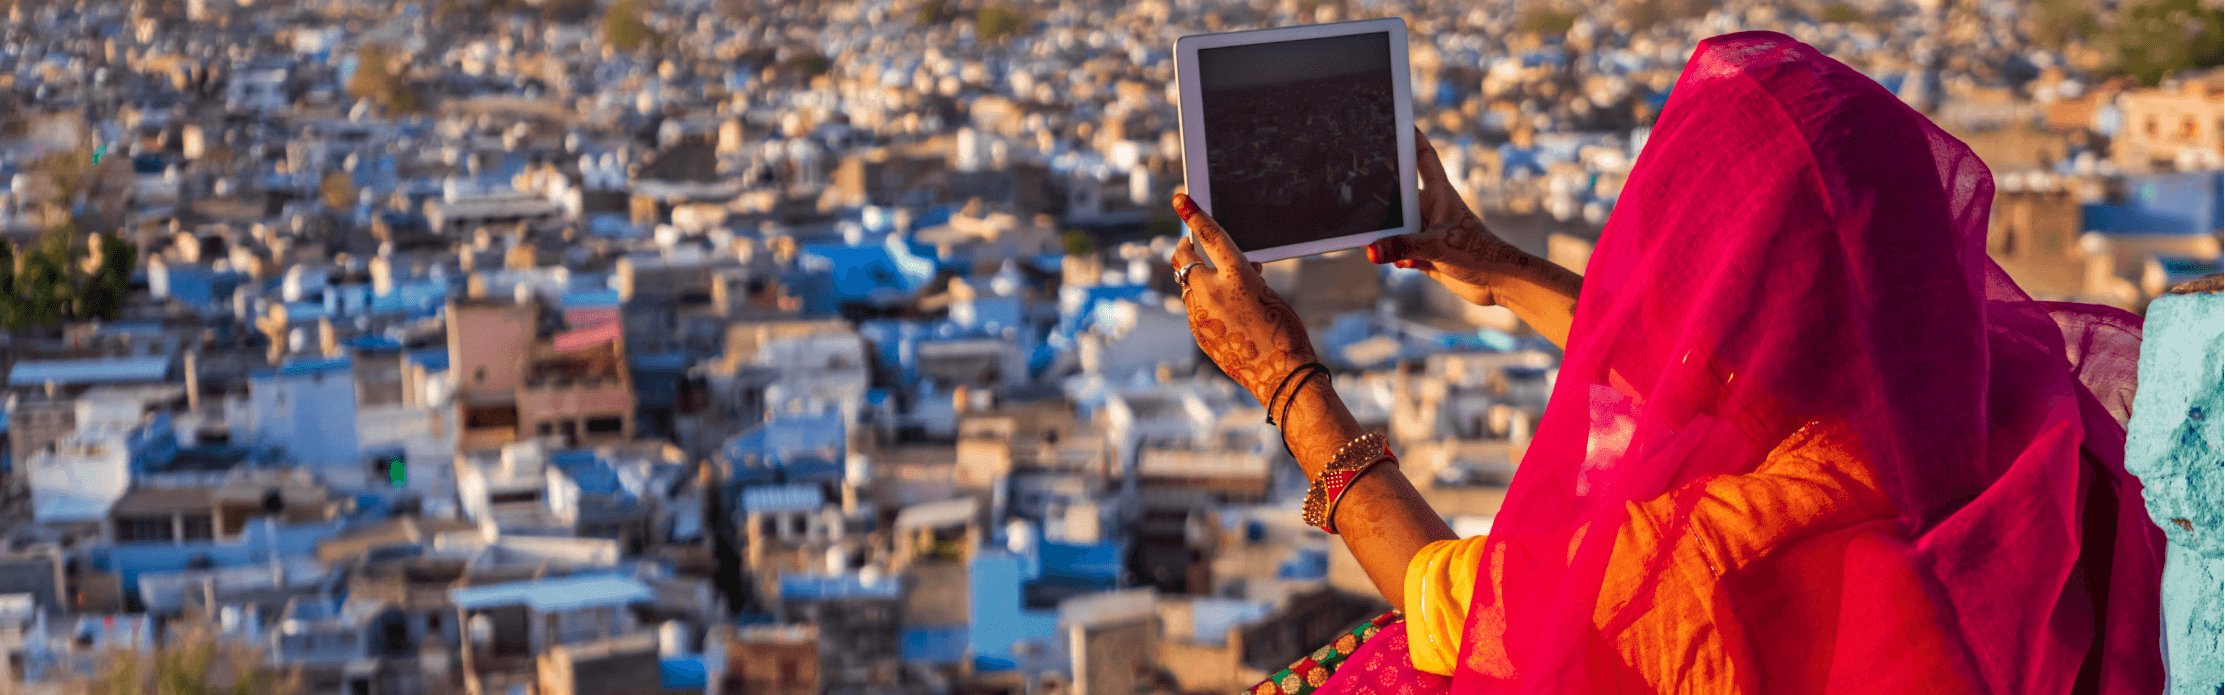 Woman with tablet overlooking city in India